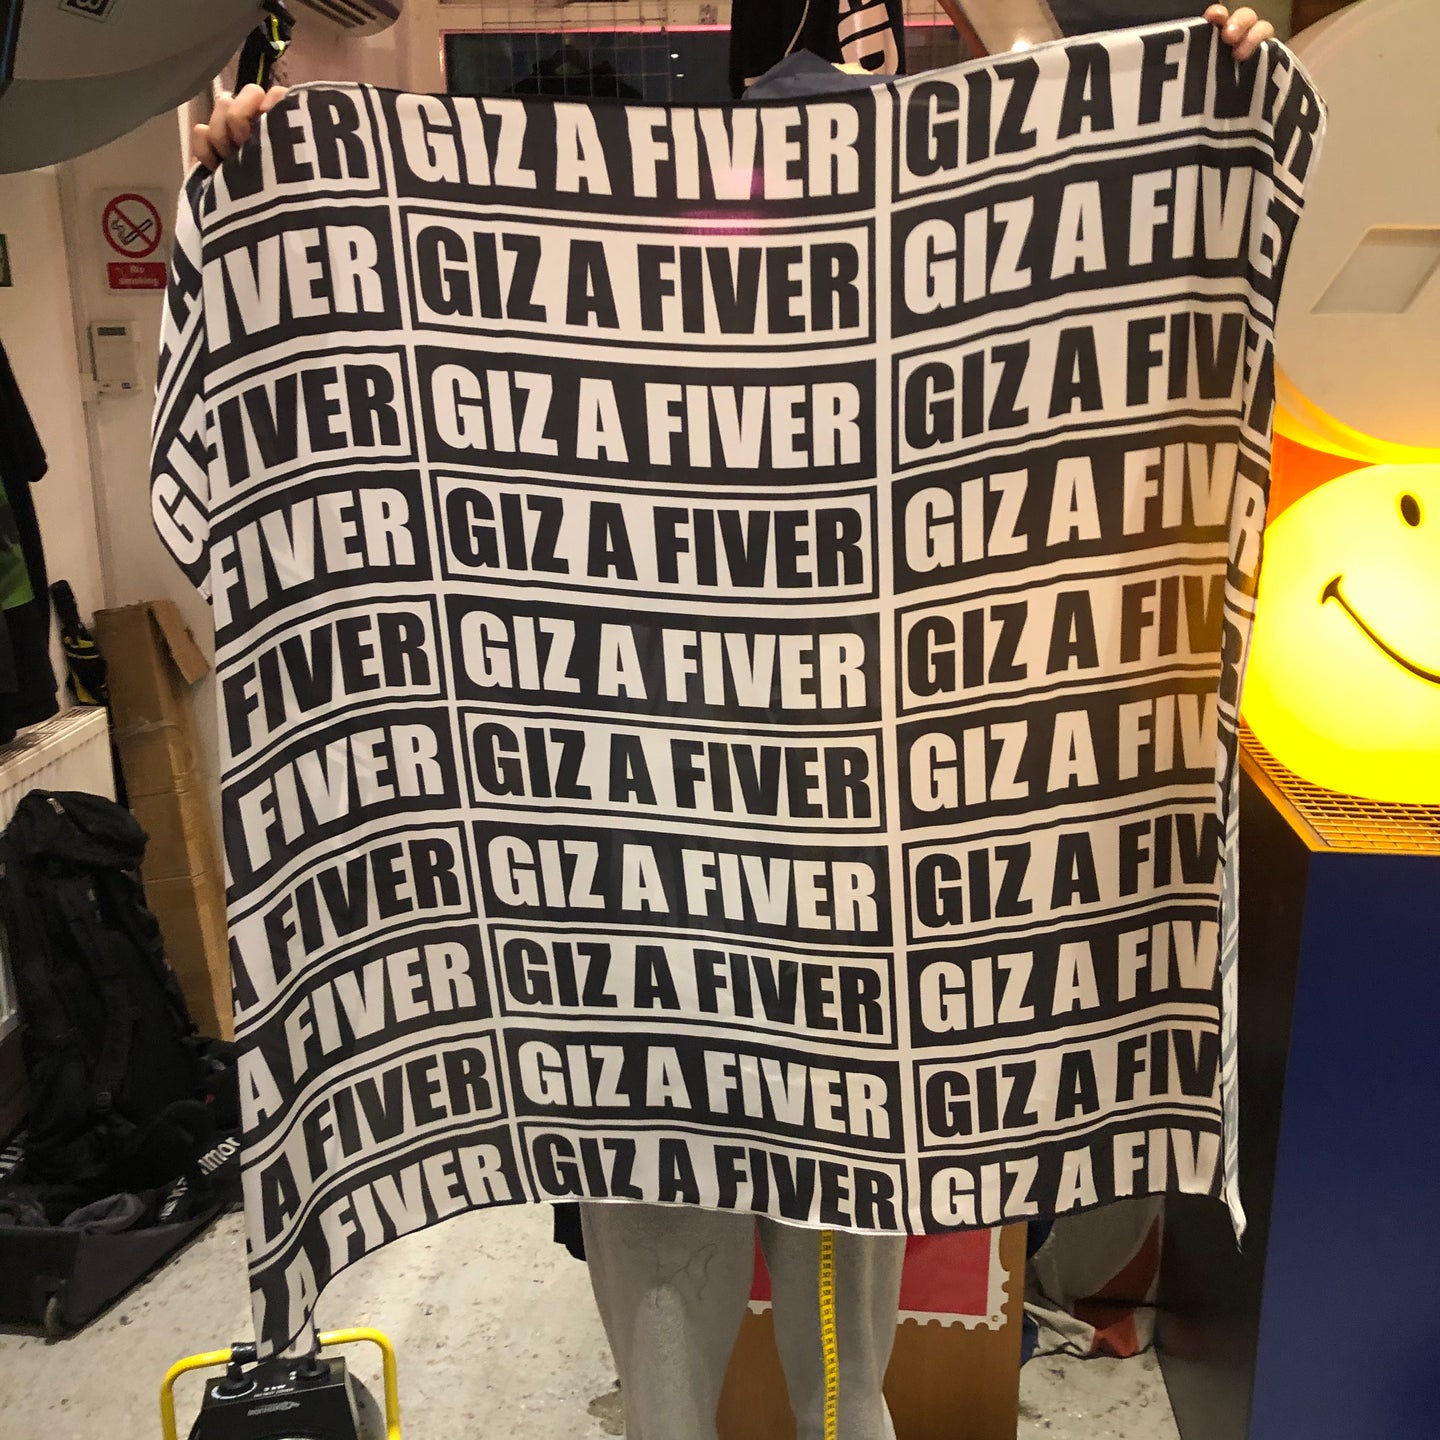 GIZ A FIVER - 'I CAN'T BELIEVE IT'S NOT SILK' scarf